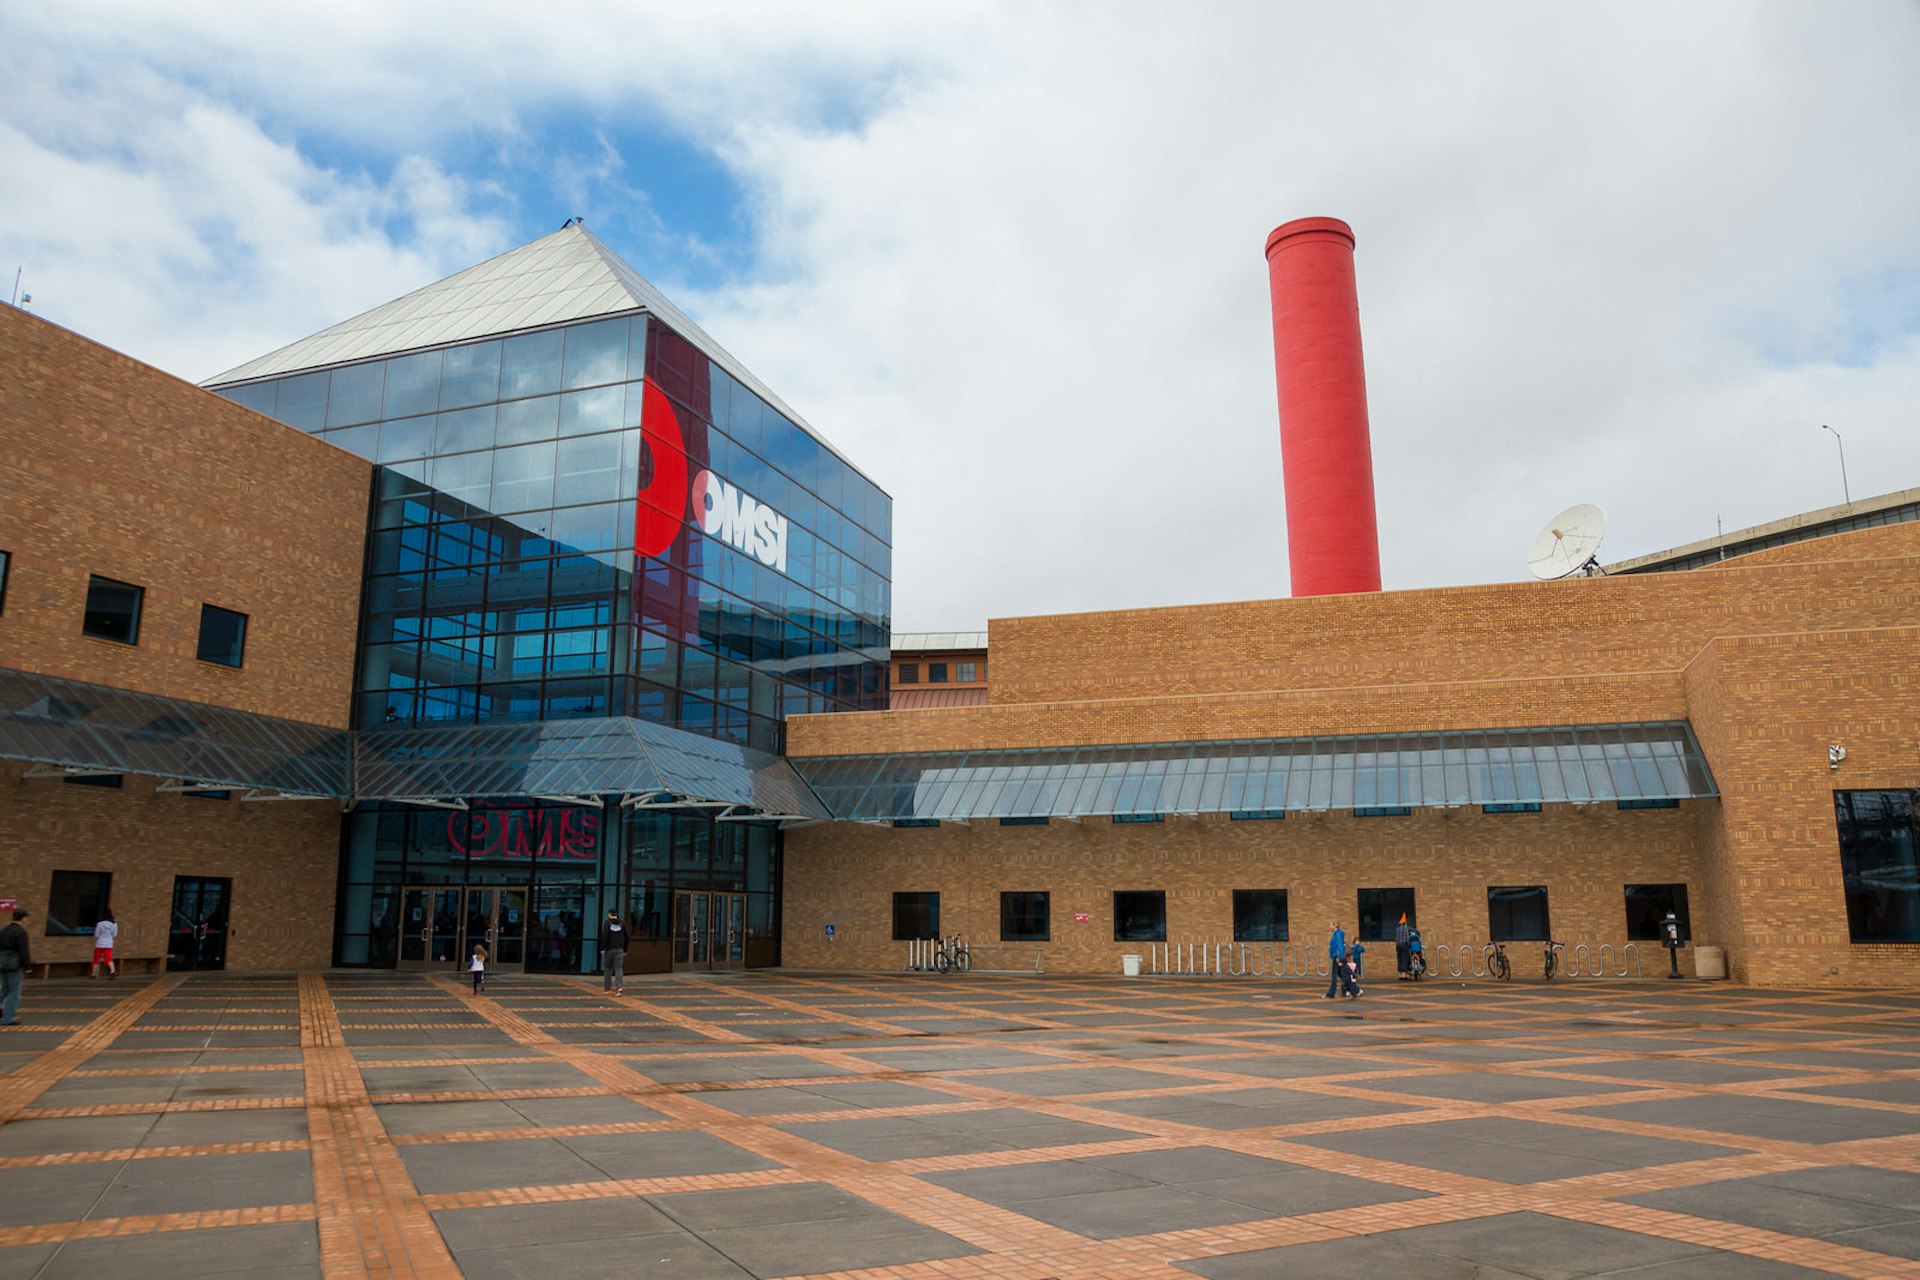 A shot of the facade of the OMSI museum in Portland, with the entrance in a large glass cube and a bright red smokestack.